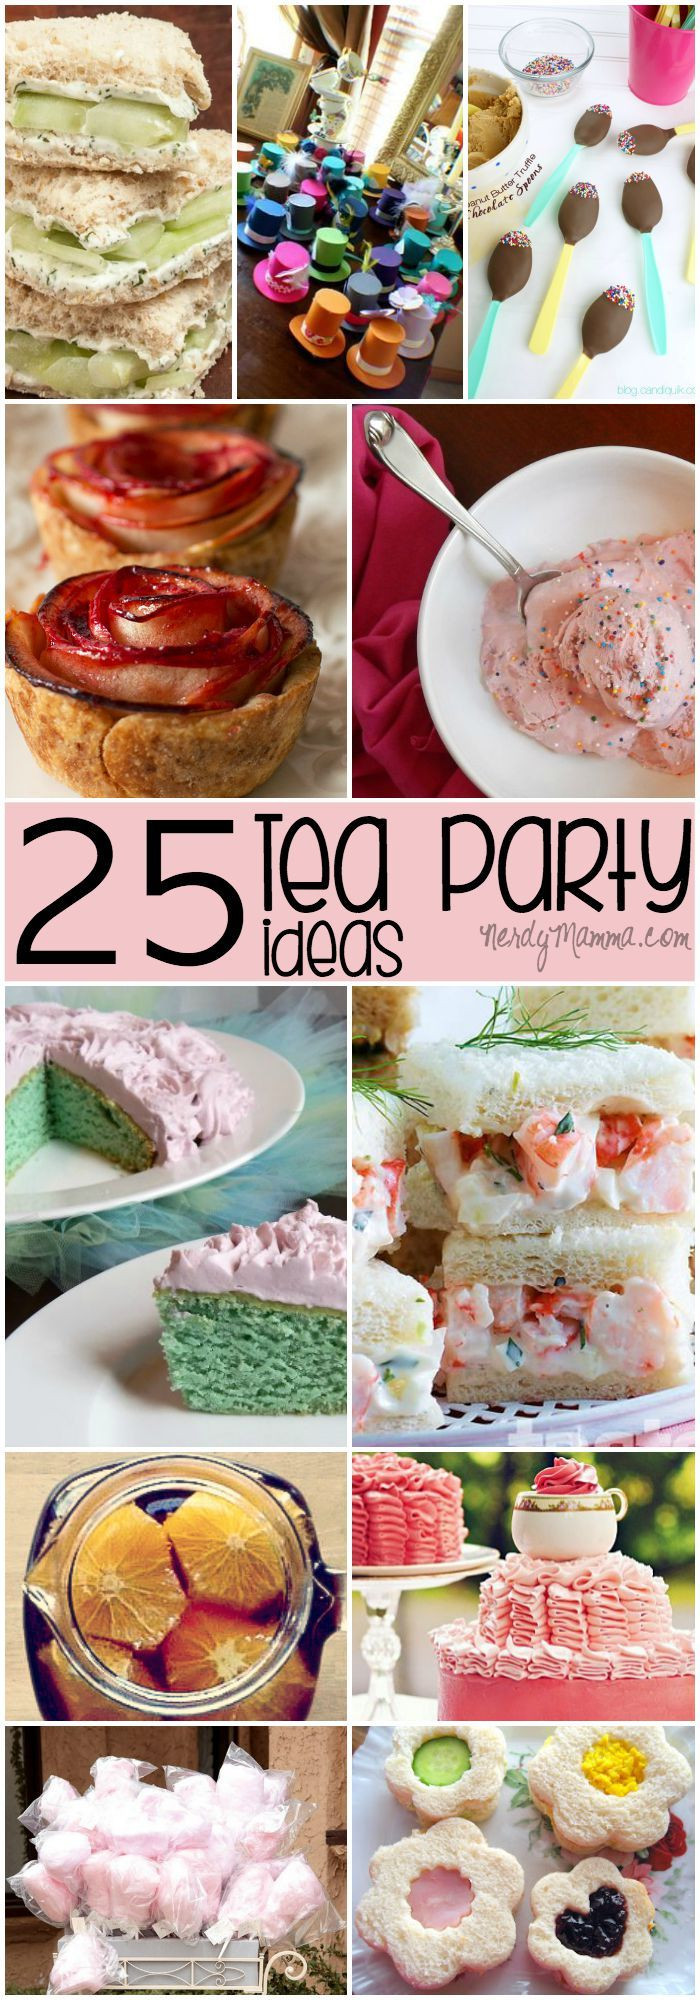 Girl Tea Party Ideas Food
 25 Picture Perfect Tea Party Ideas for a Girly Fun